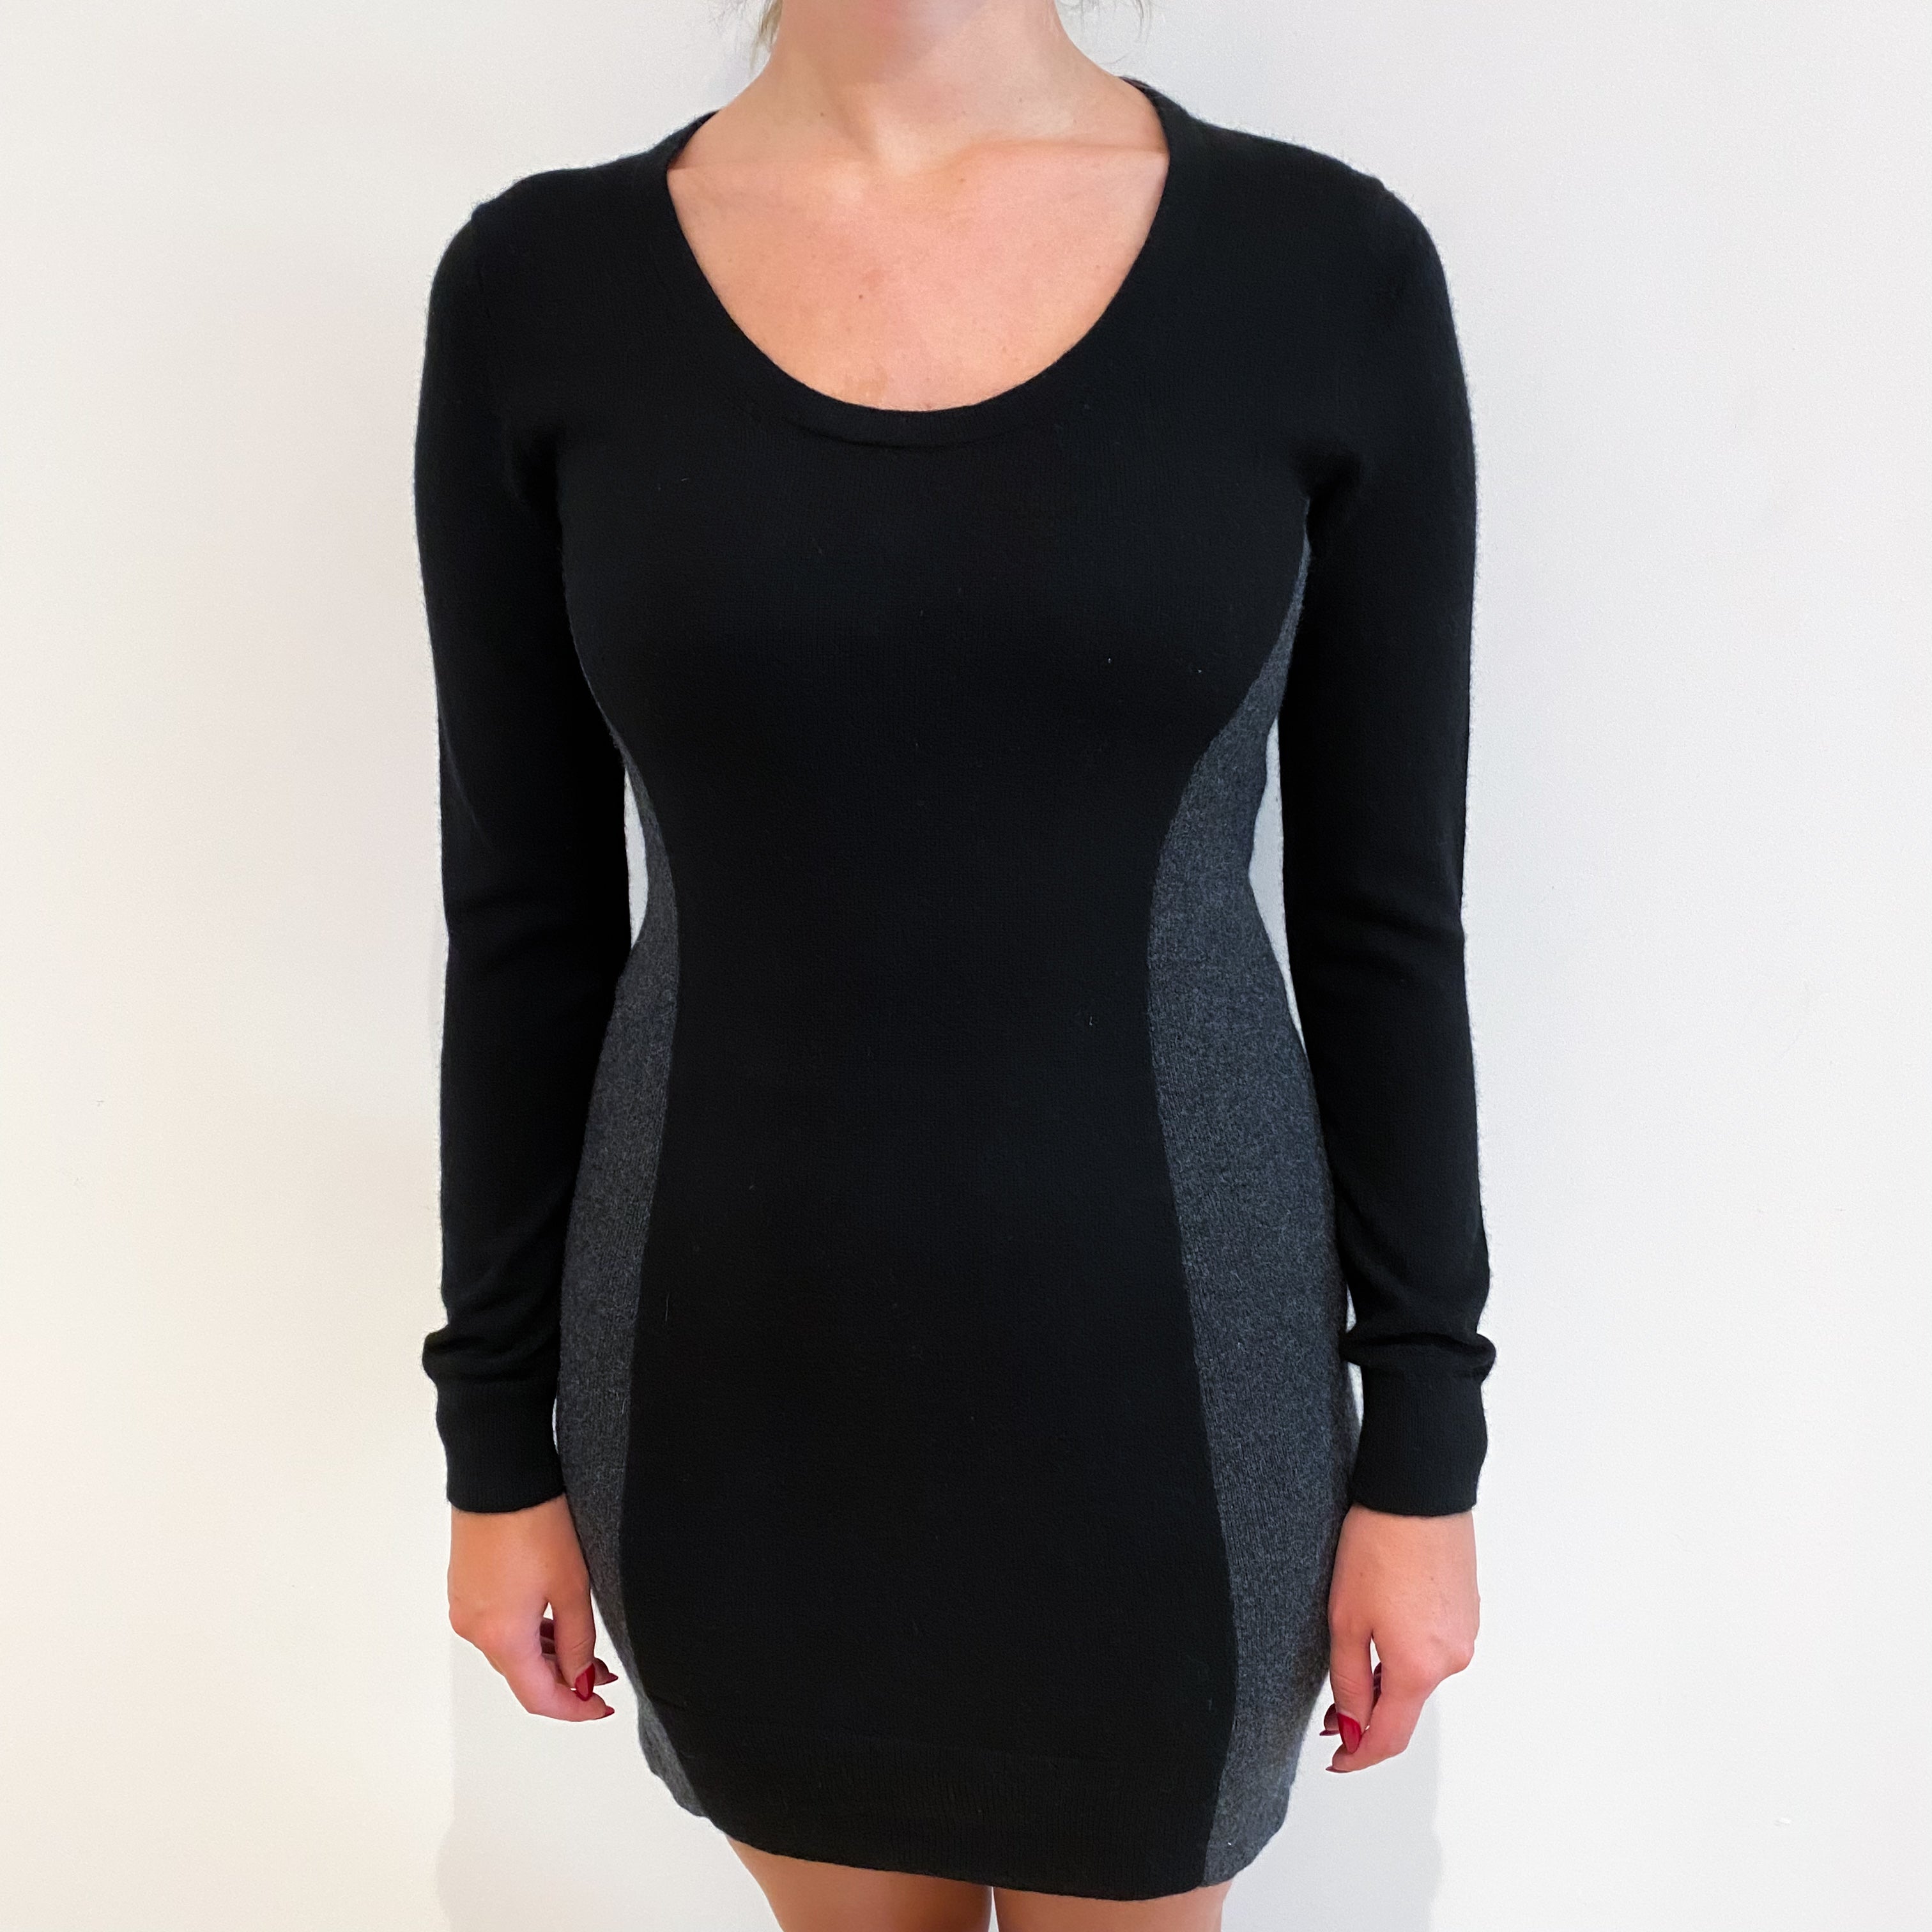 Black and Grey Cashmere Scoop Neck Dress Small